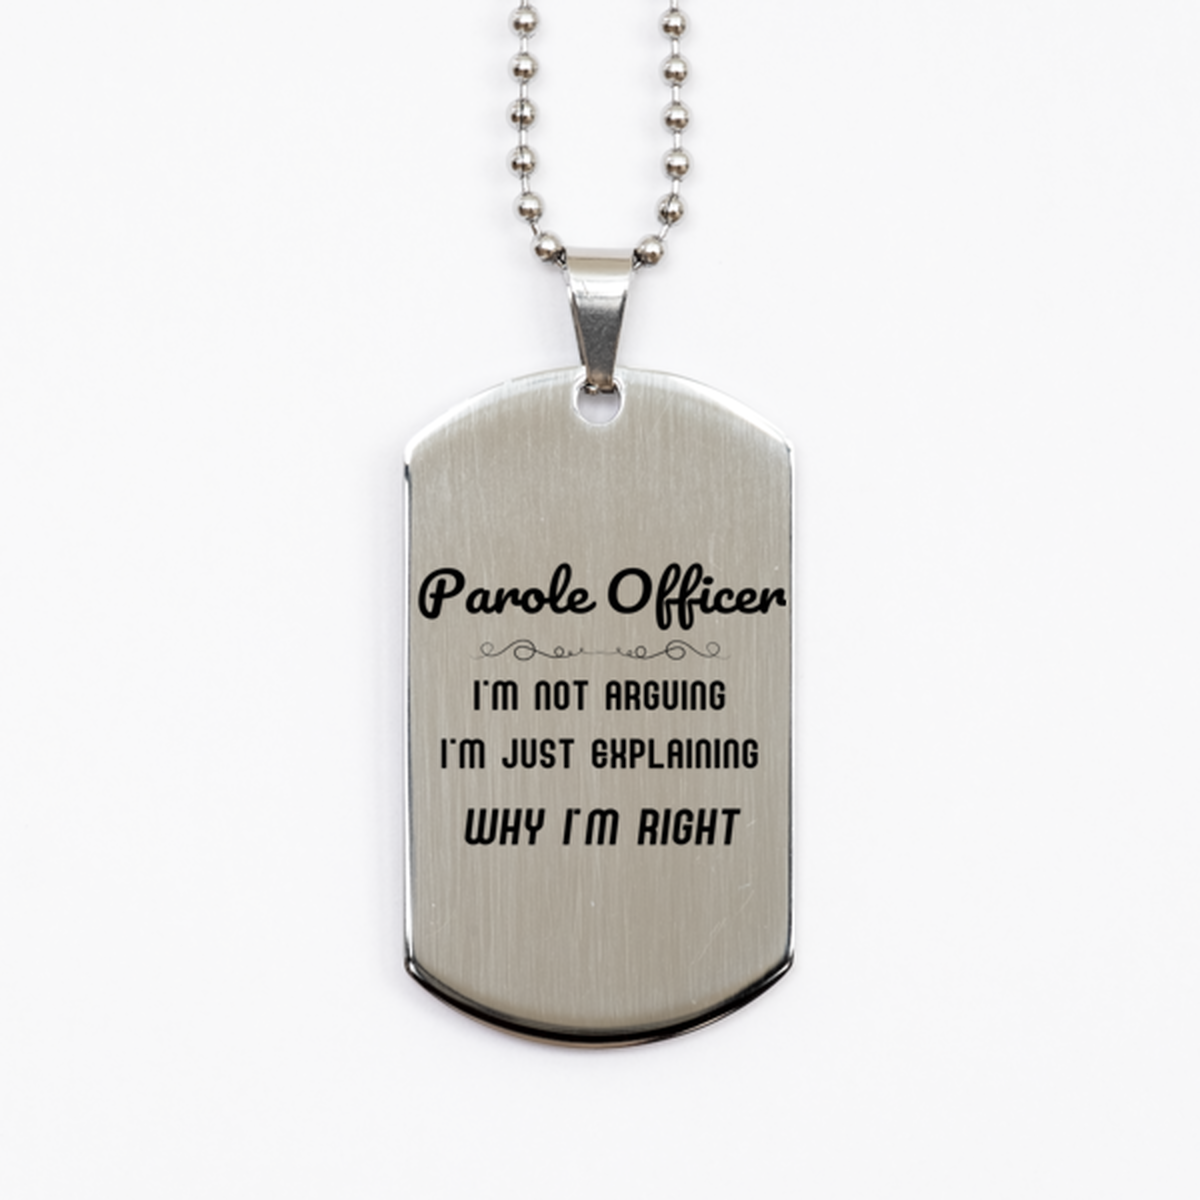 Parole Officer I'm not Arguing. I'm Just Explaining Why I'm RIGHT Silver Dog Tag, Funny Saying Quote Parole Officer Gifts For Parole Officer Graduation Birthday Christmas Gifts for Men Women Coworker